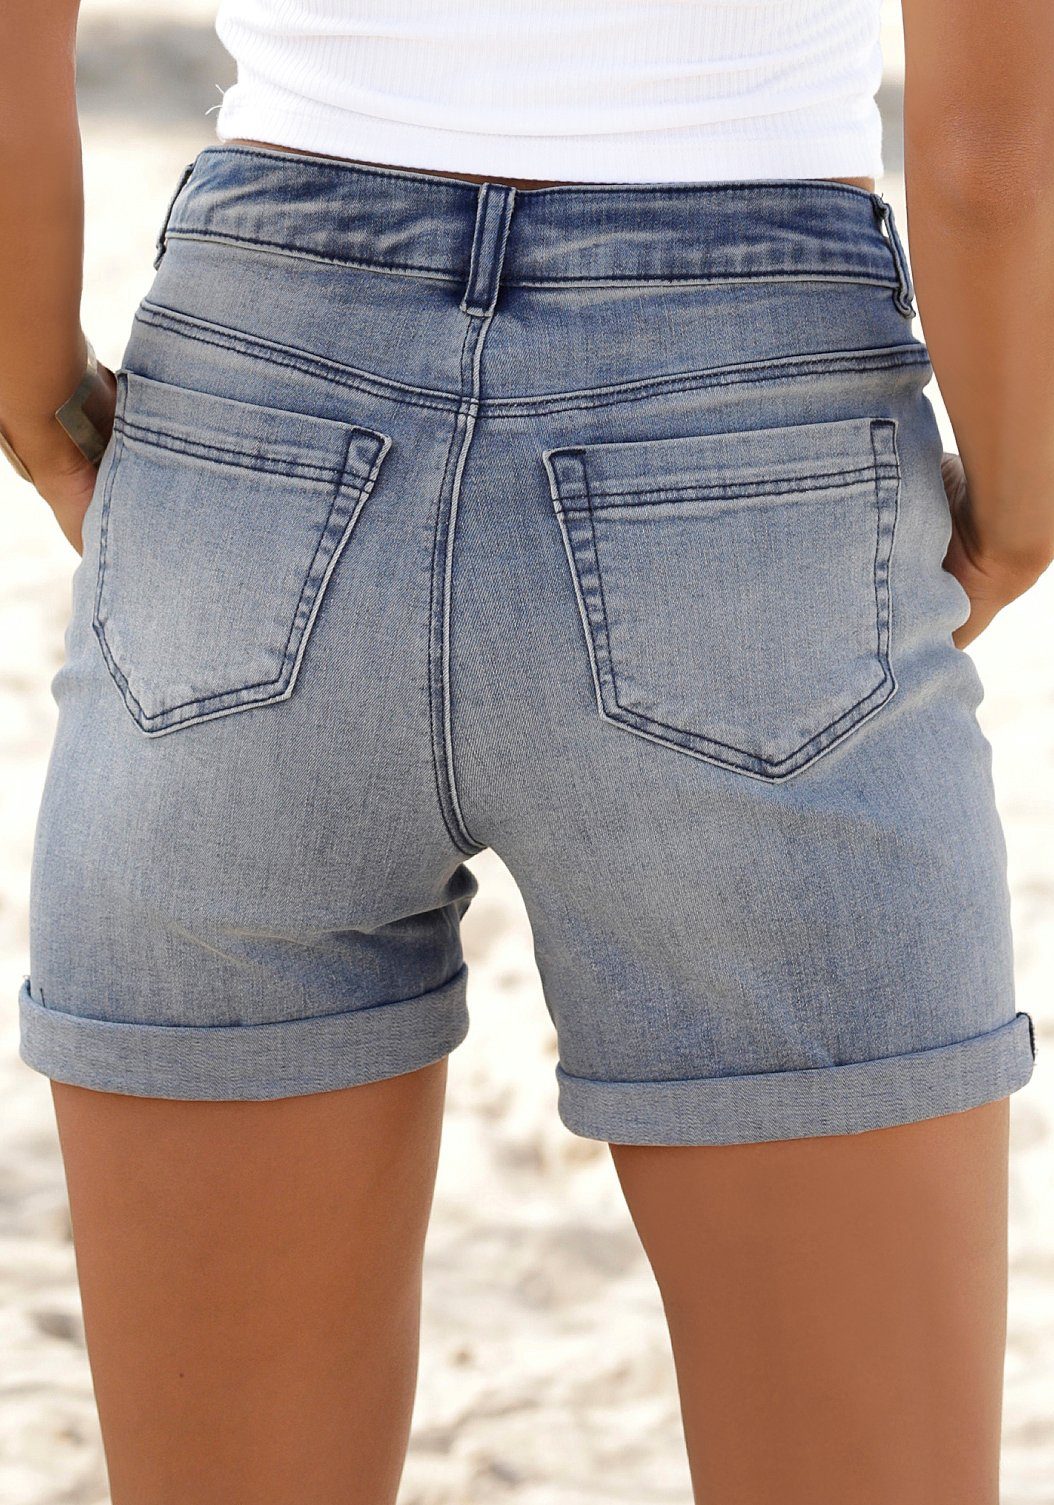 Buffalo Jeansshorts in High-waist-Form blue-washed